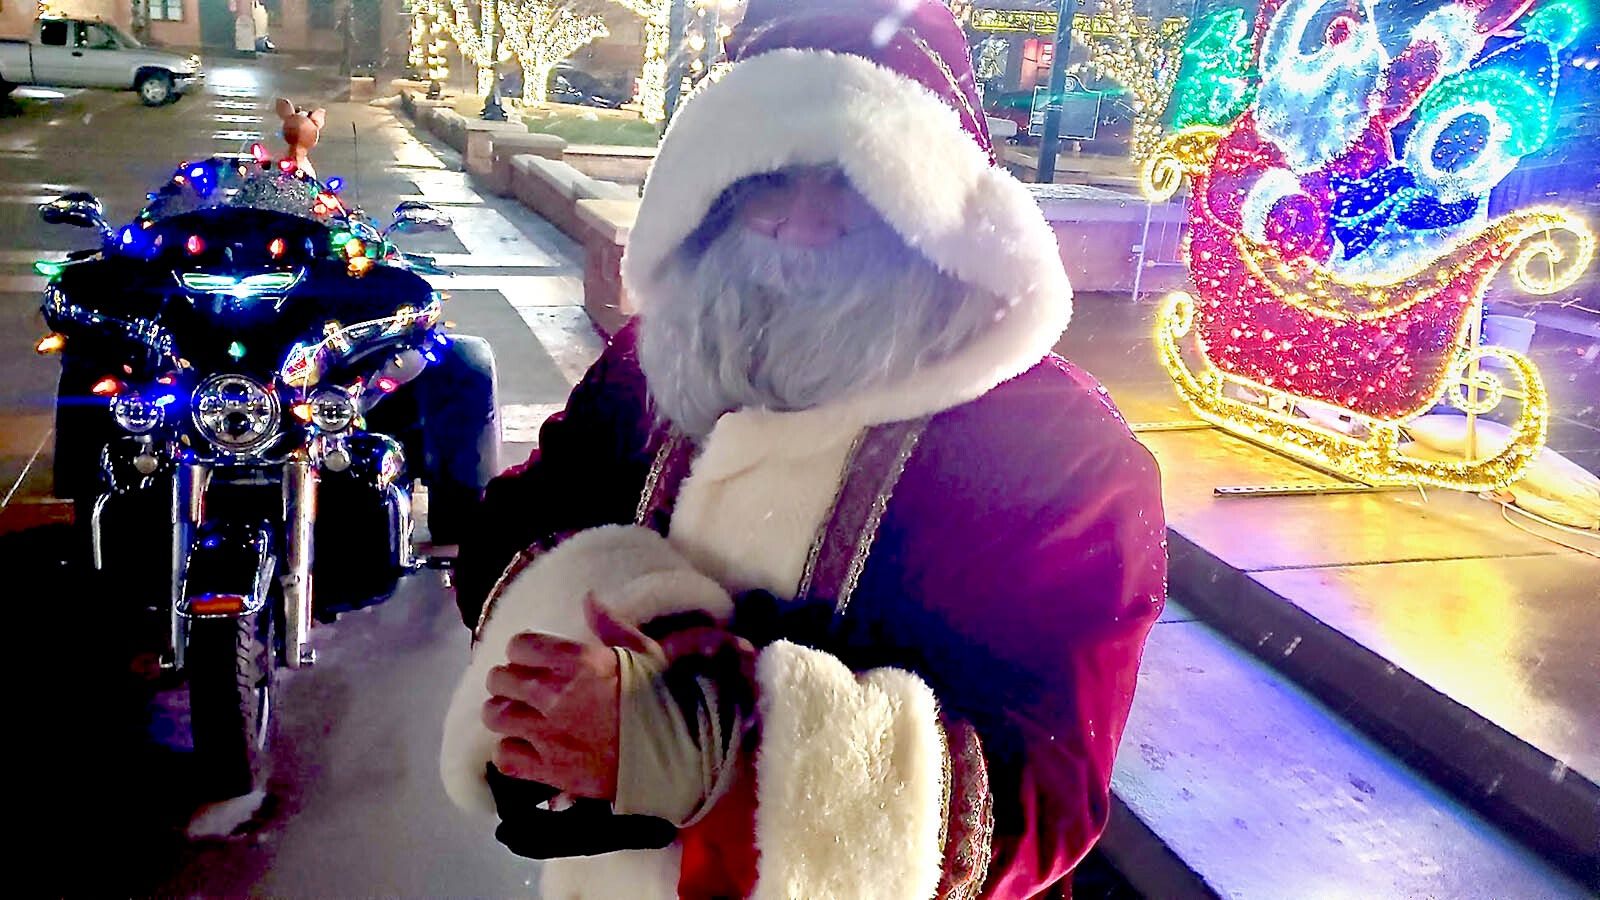 Santa, aka Rick Ramos of Cheyenne, has been spotted in Cheyenne with a Harley wrapped in Christmas lights.